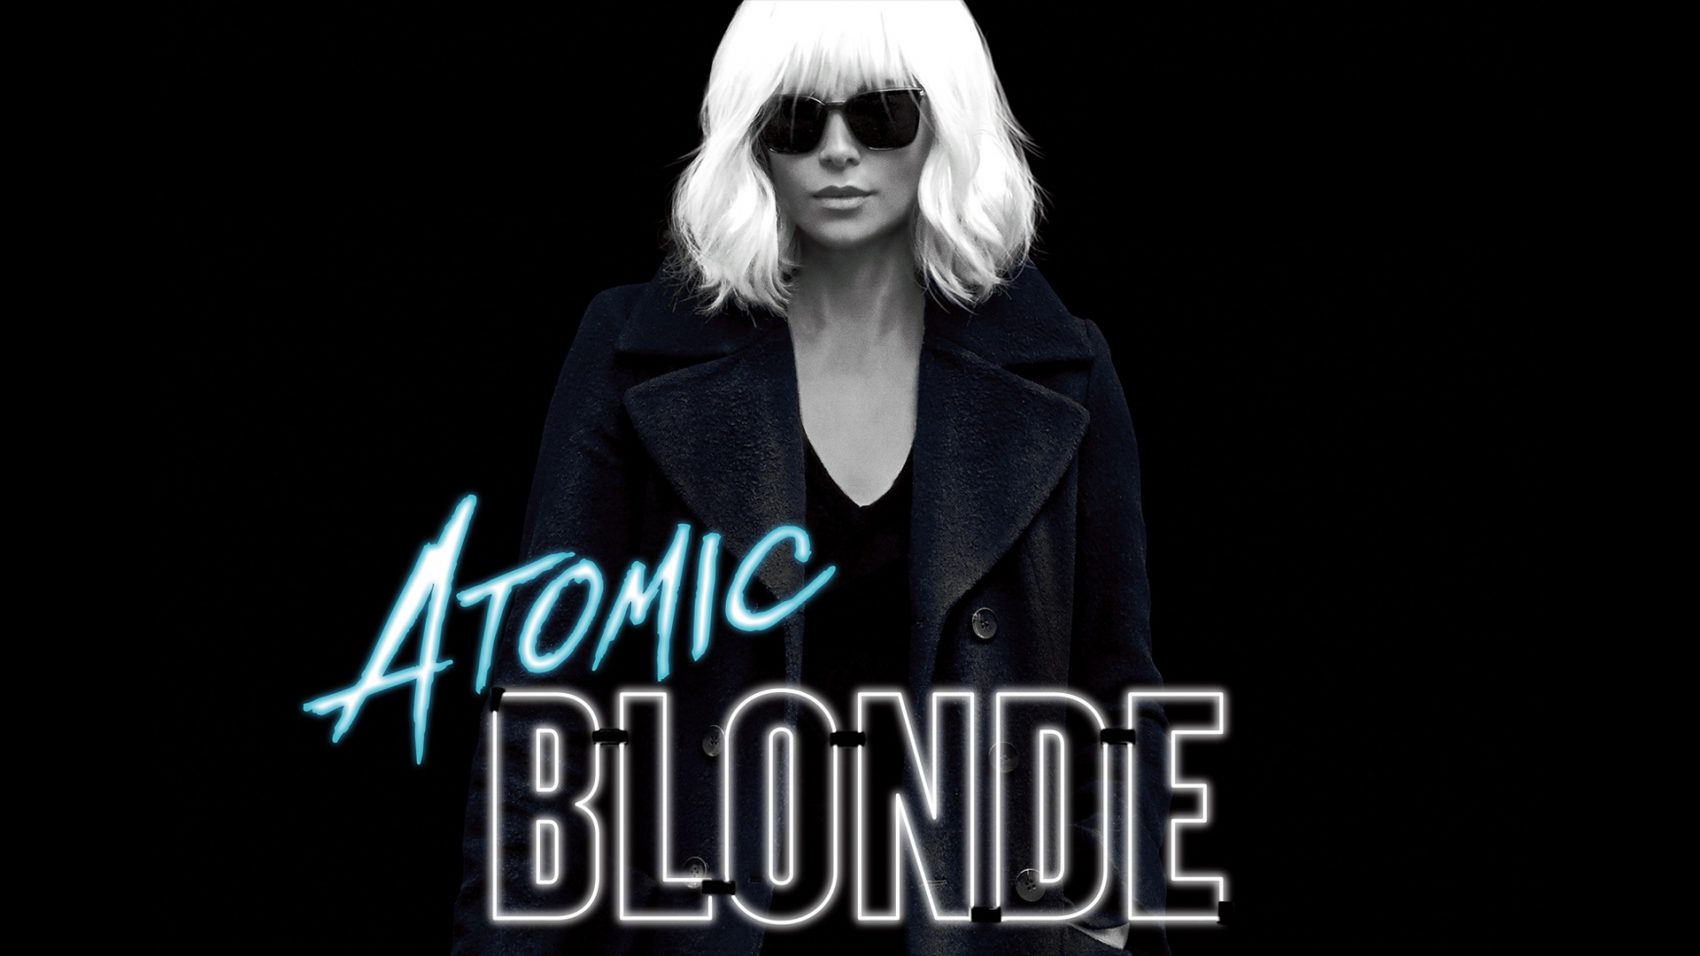 ‘atomic blonde’ trailer #2: the summer’s sultry sleeper hit, from the maker of ‘john wick’